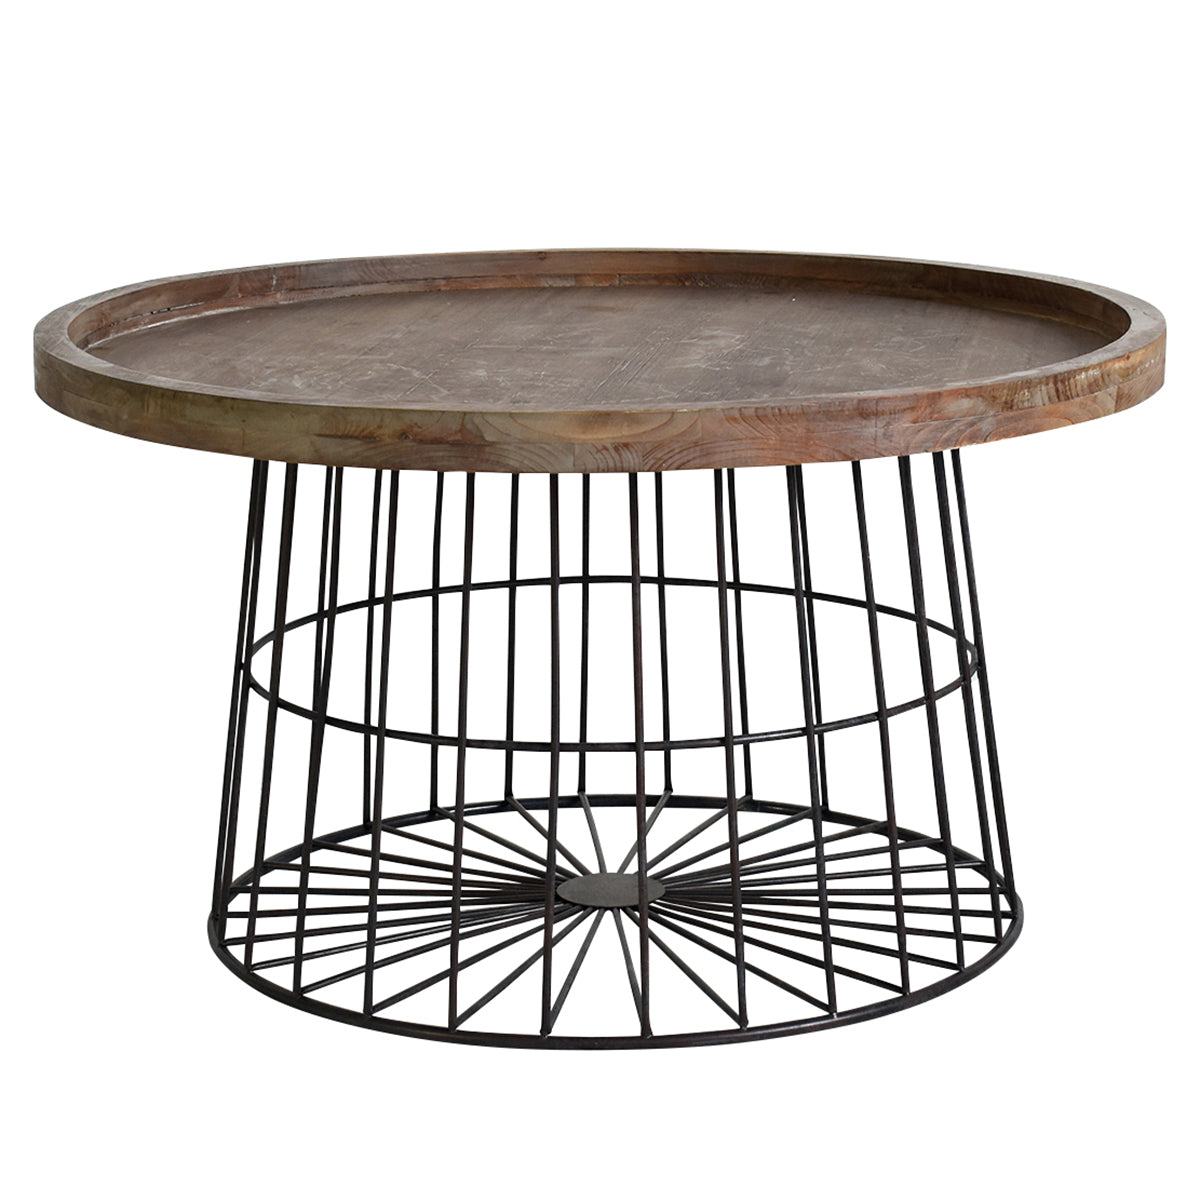 A Menzies Coffee Table 800x800x450mm by Kikiathome.co.uk, perfect for home furniture and interior decor, featuring a wire basket on top.